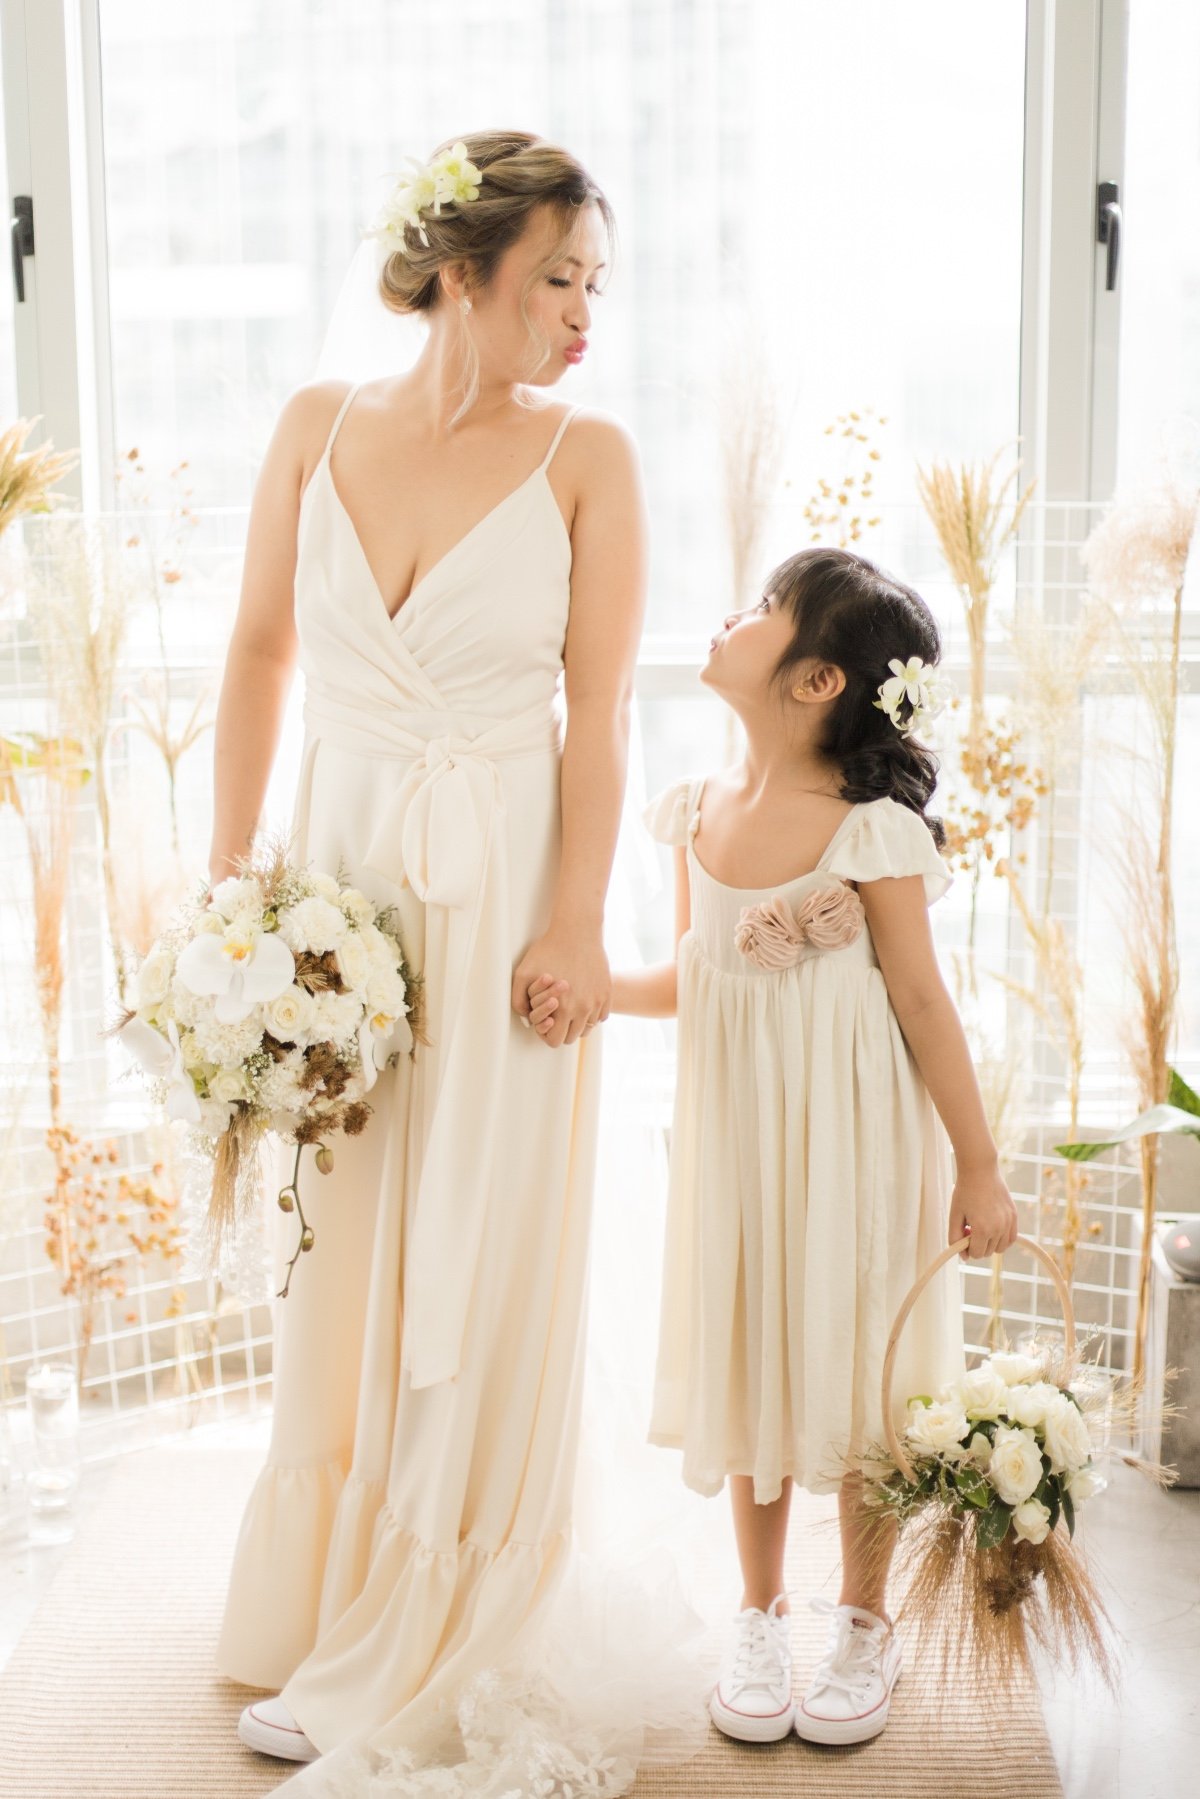 bride and flower girl photography pose idea